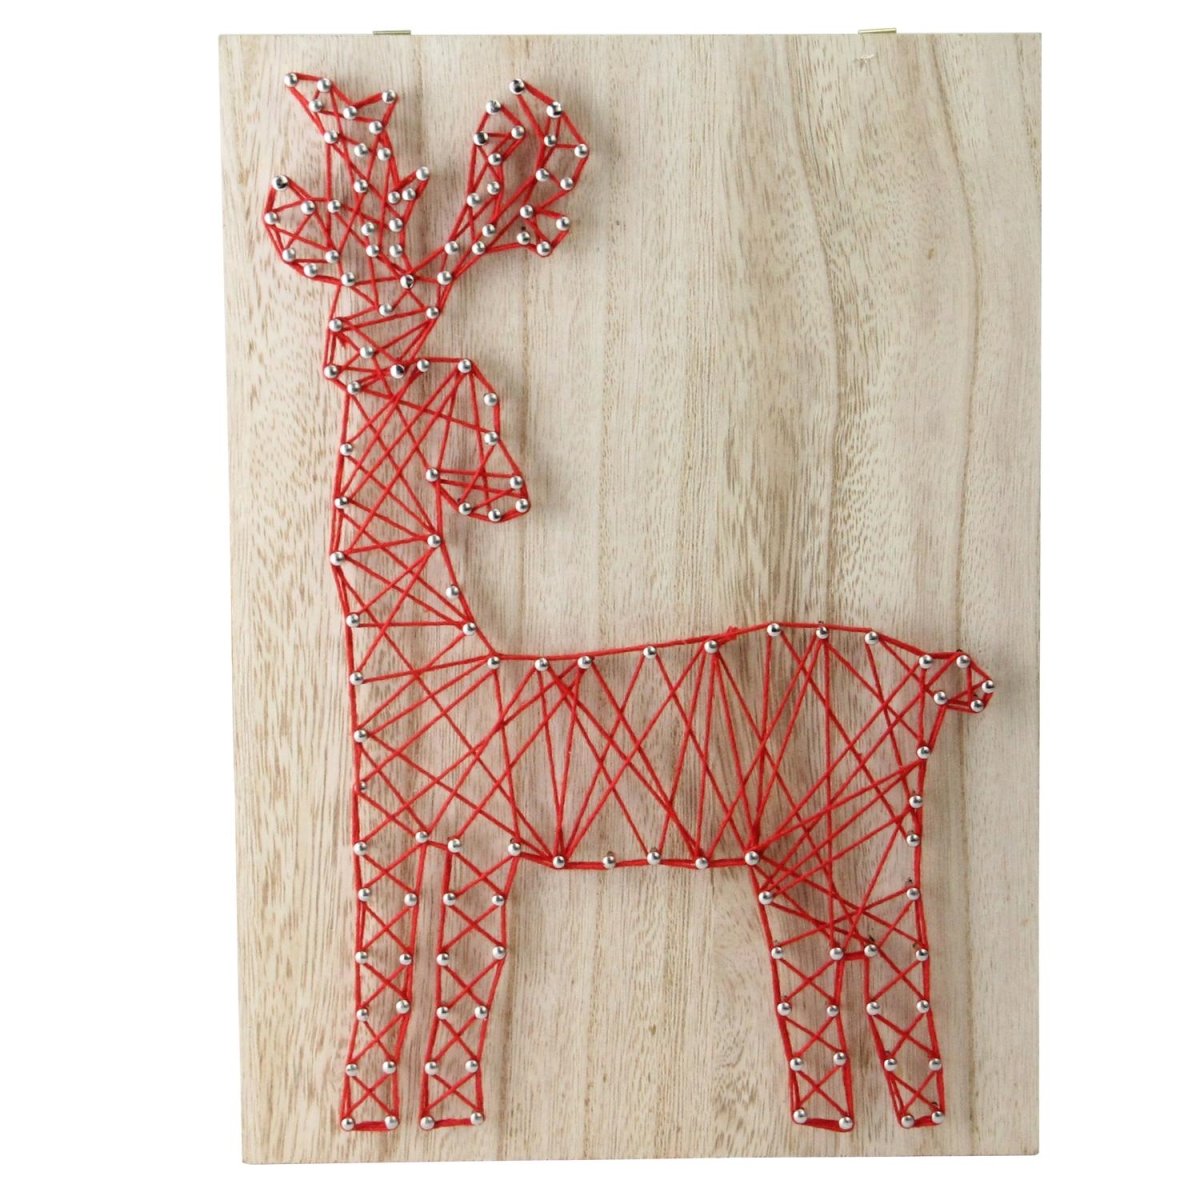 32623014 11 In. Reindeer Wall Decoration, Ruby Red